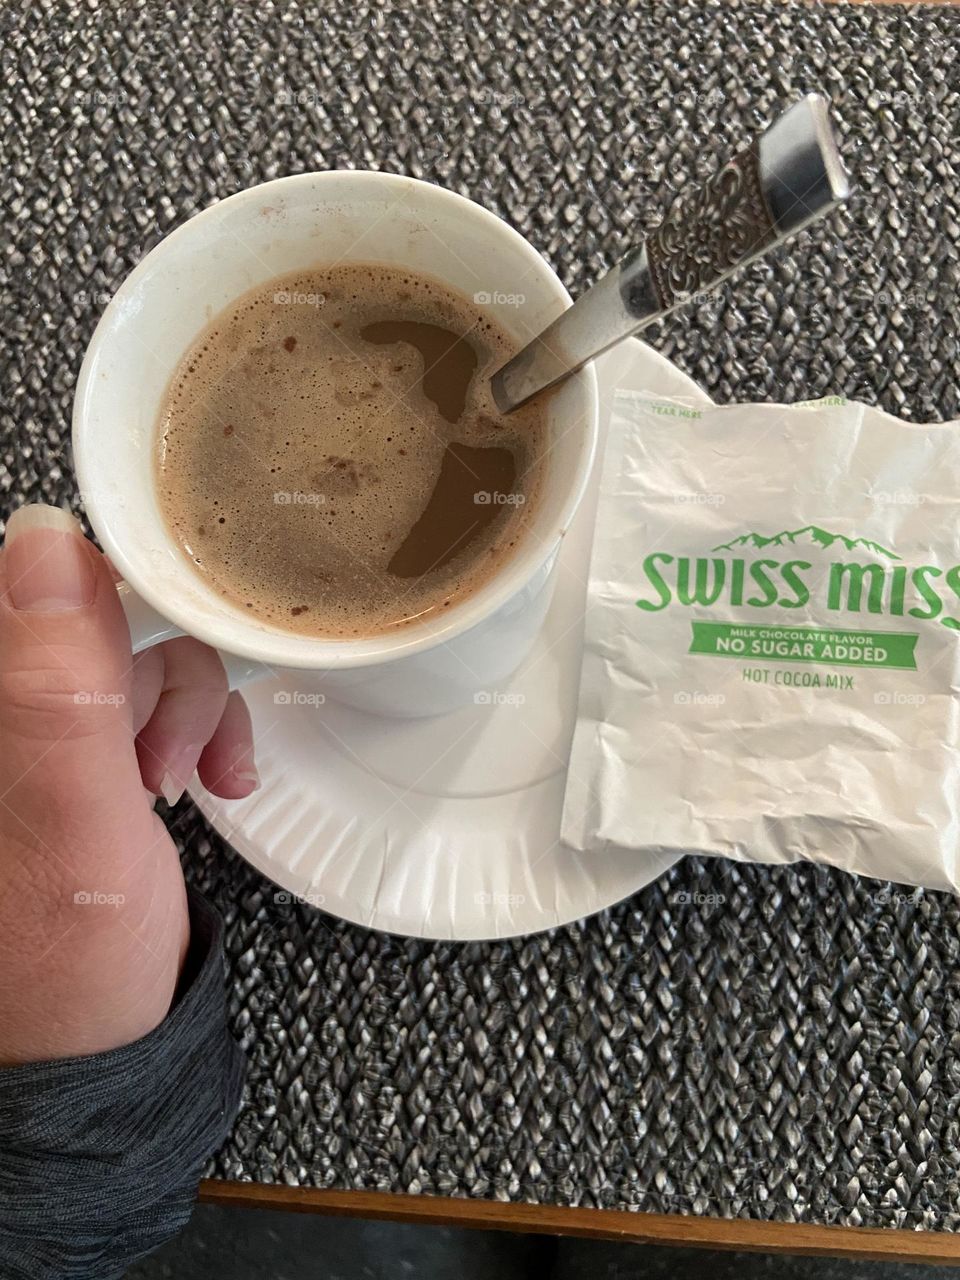 A mug of coffee mixed with Swiss Miss hot chocolate and a little milk. This is my own version of a coffee shop Mocha, but I use sugar free cocoa powder mix and skim milk to keep calories down. It is every bit as delicious though. 